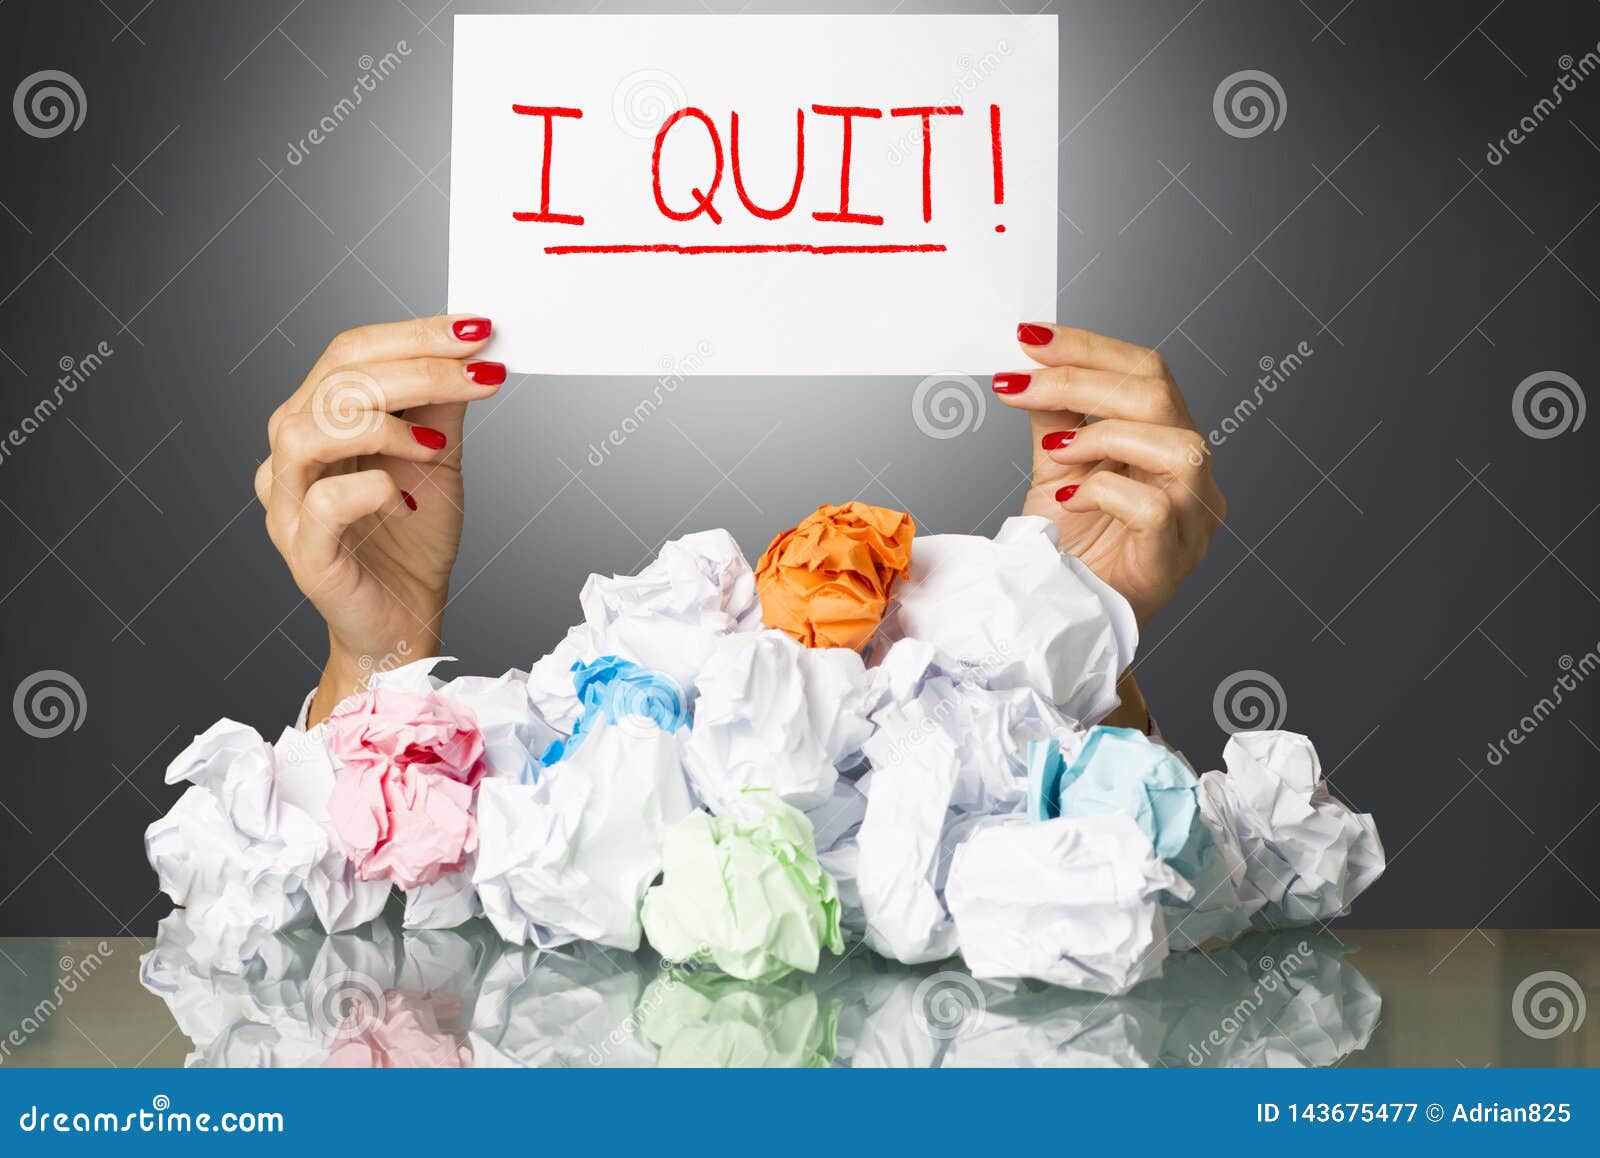 i quit, decision of exhausted employee on white paper, behind  a stack of wastepaper